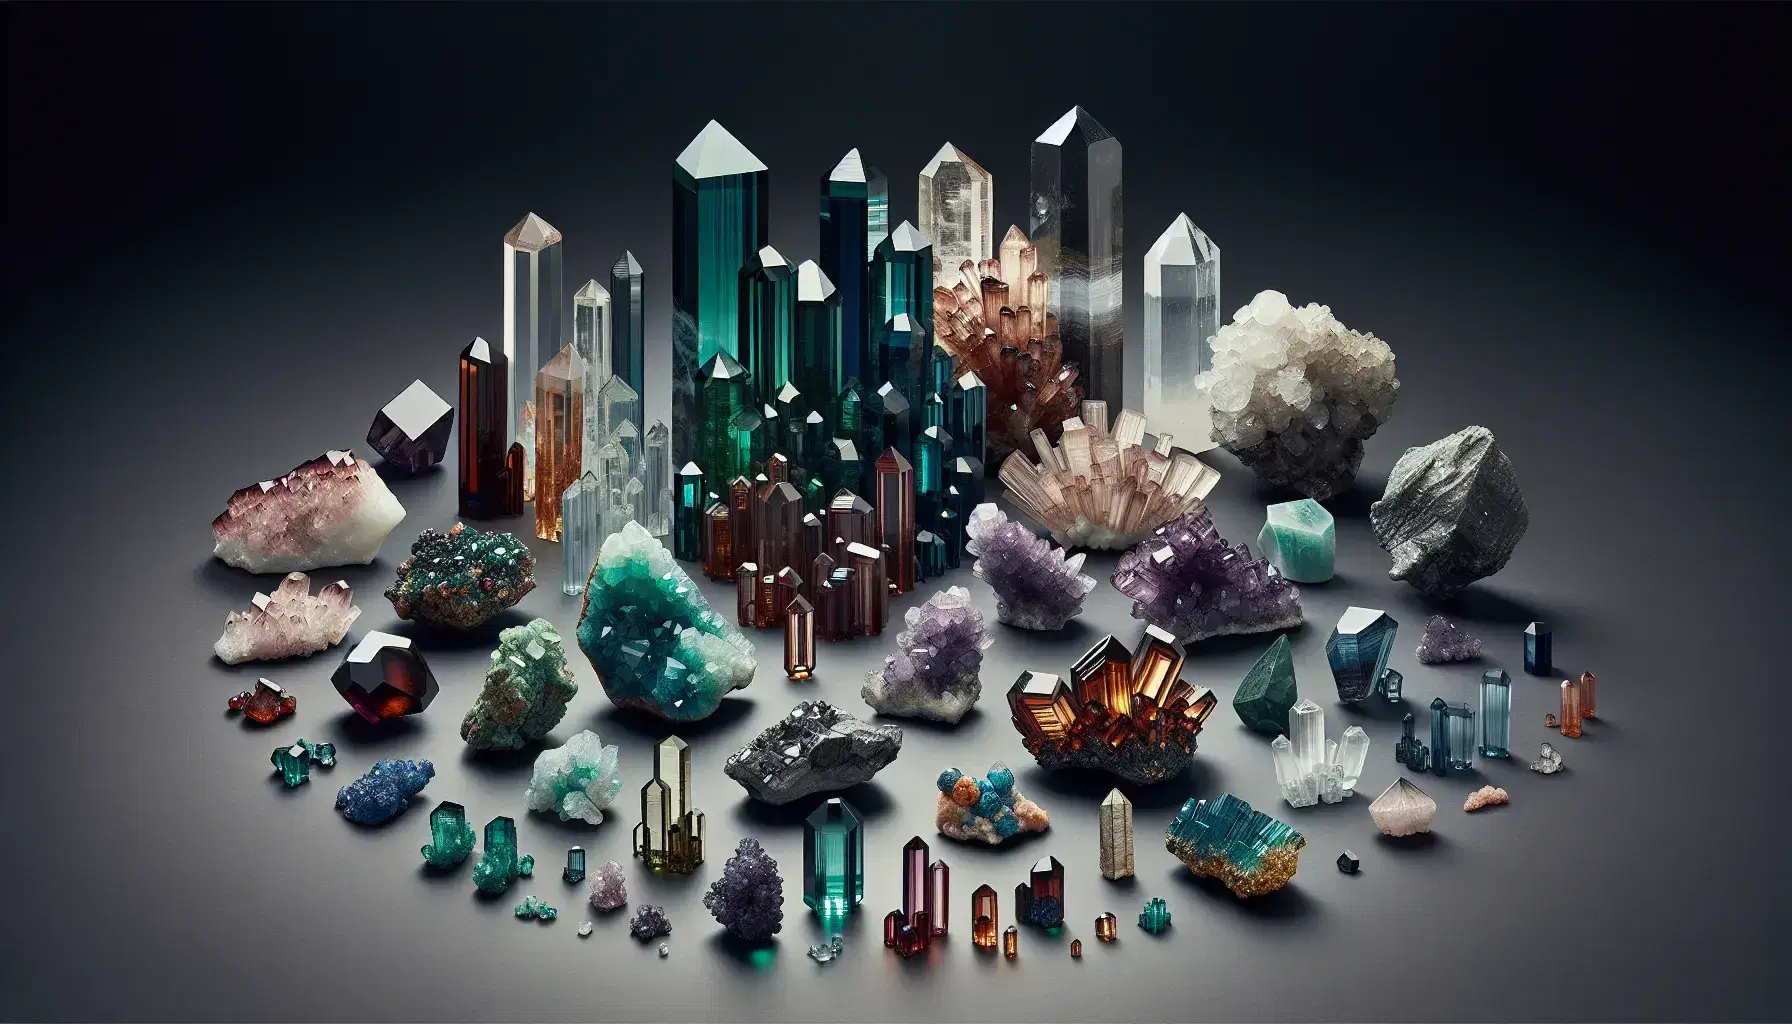 Collection of colorful minerals on a black background, with green beryl, red garnet, transparent quartz, blue azurite, golden pyrite, translucent gypsum and blue kyanite.